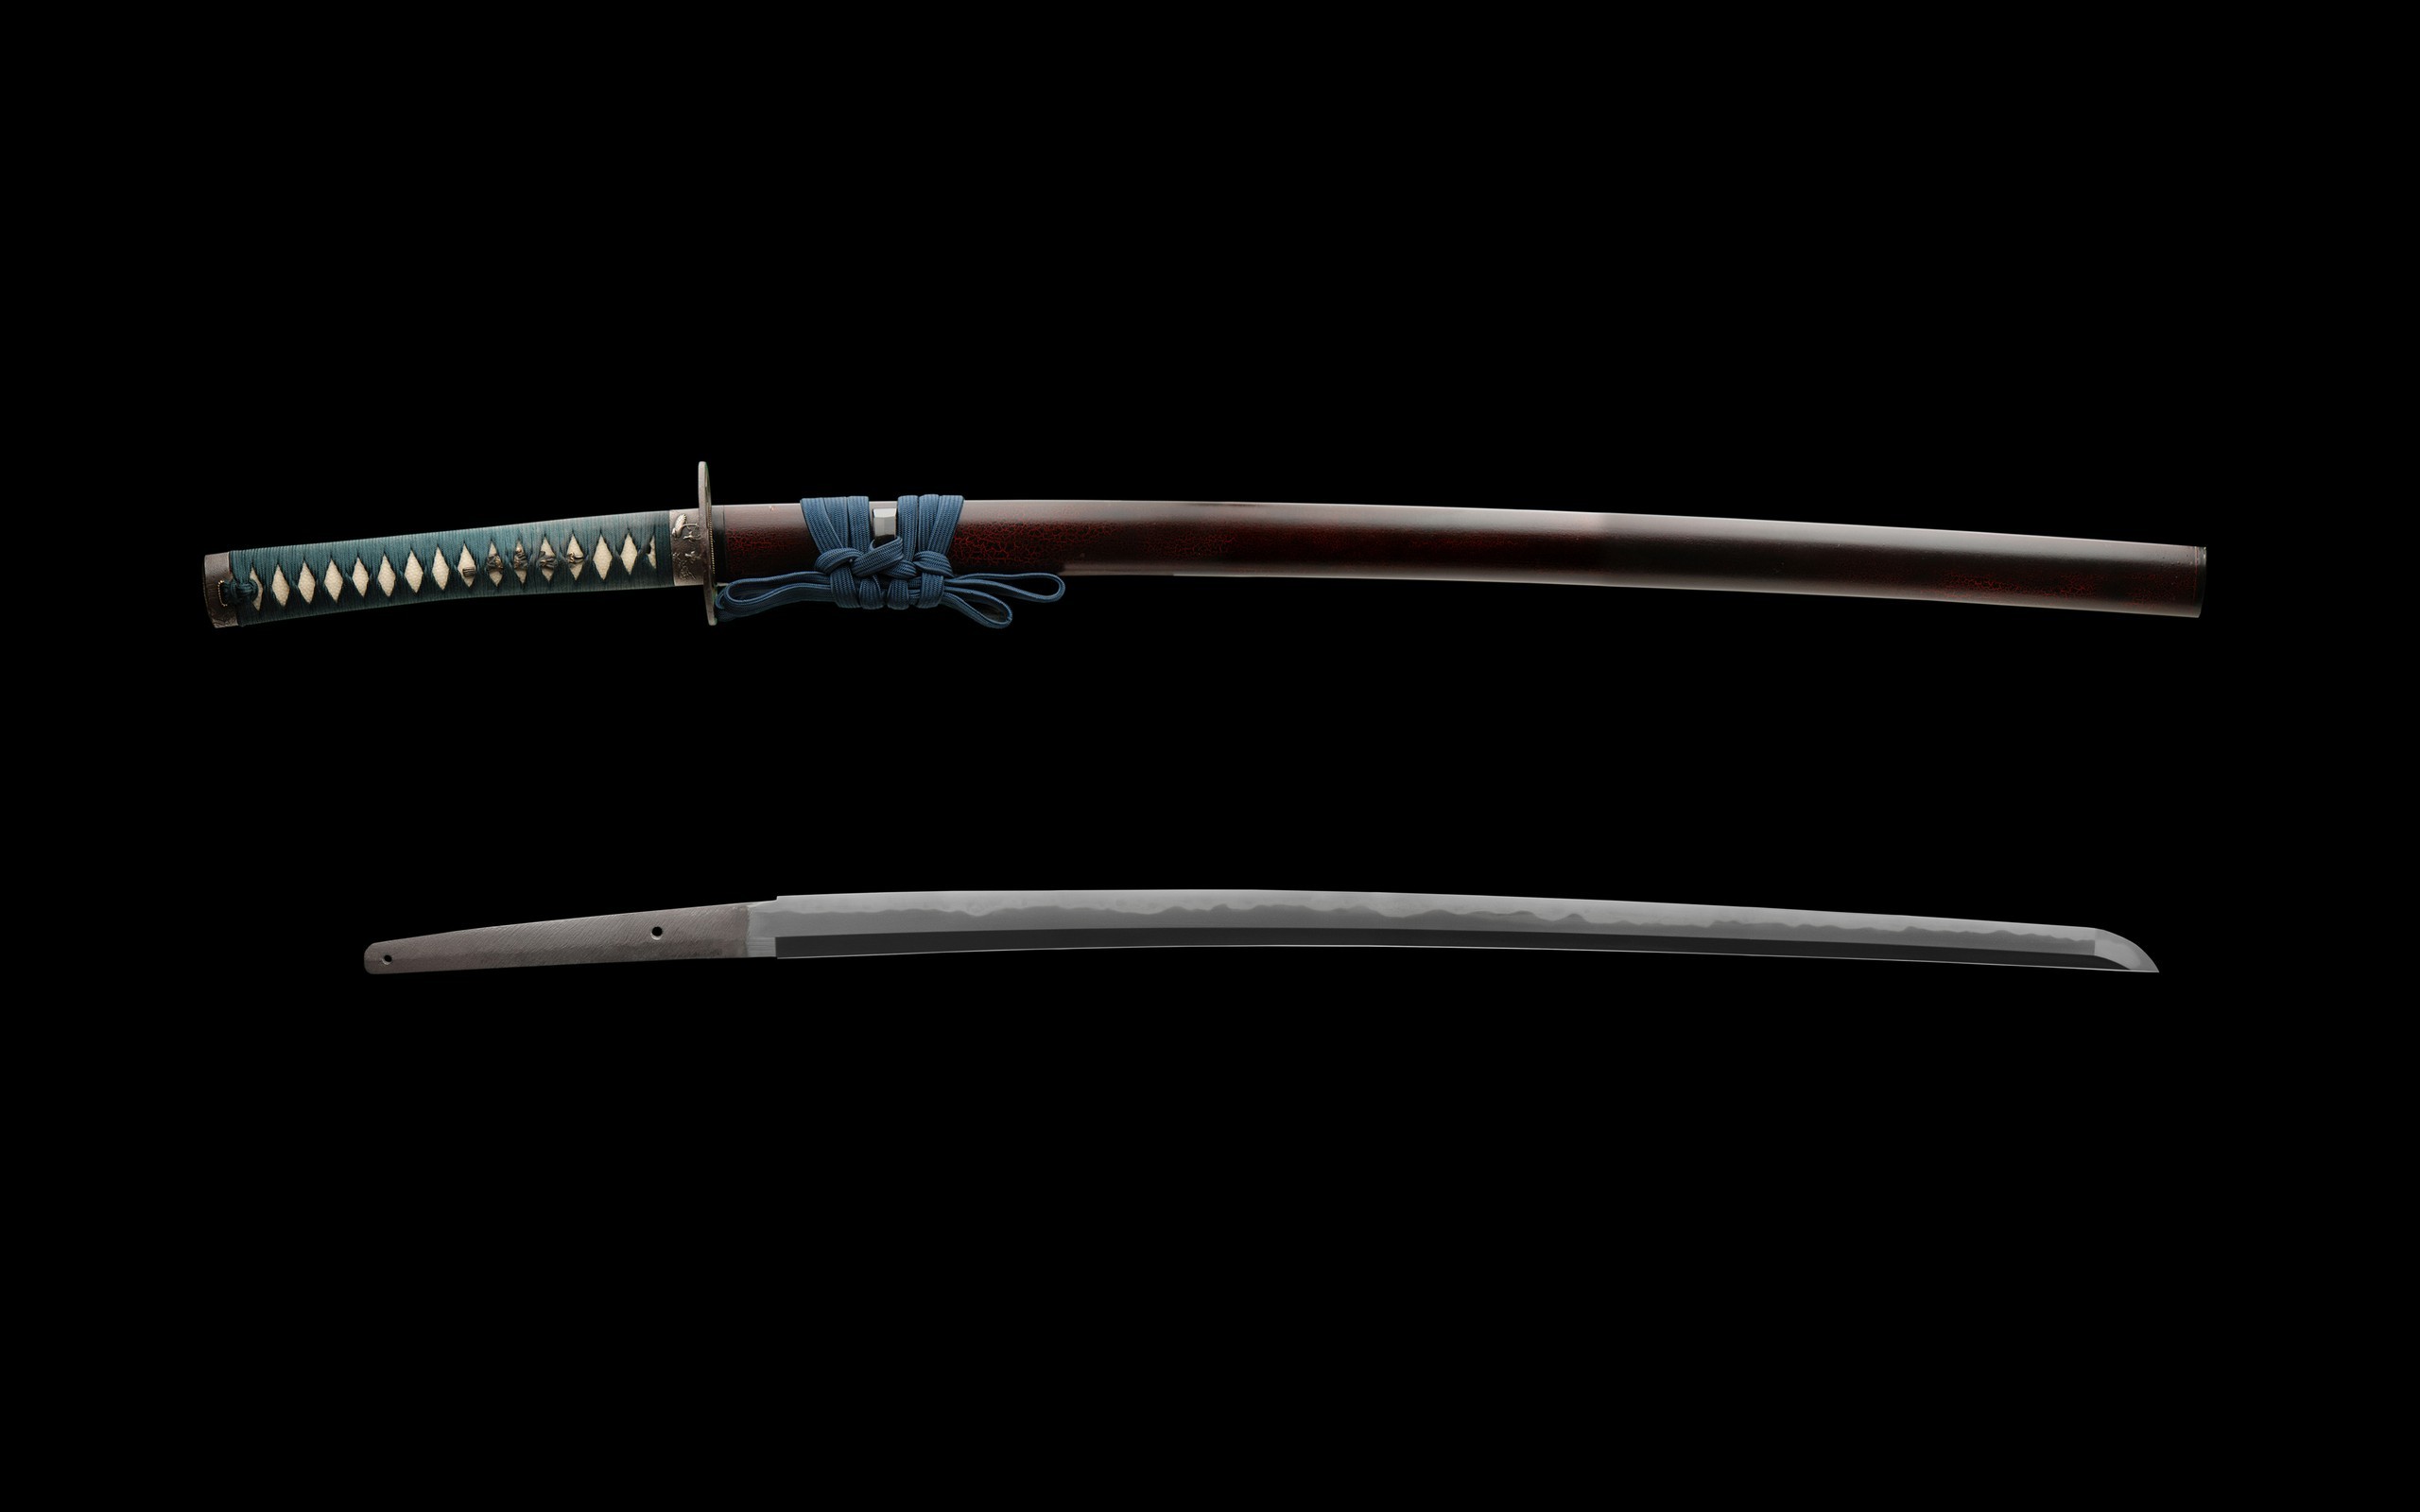 General 2560x1600 weapon simple background katana